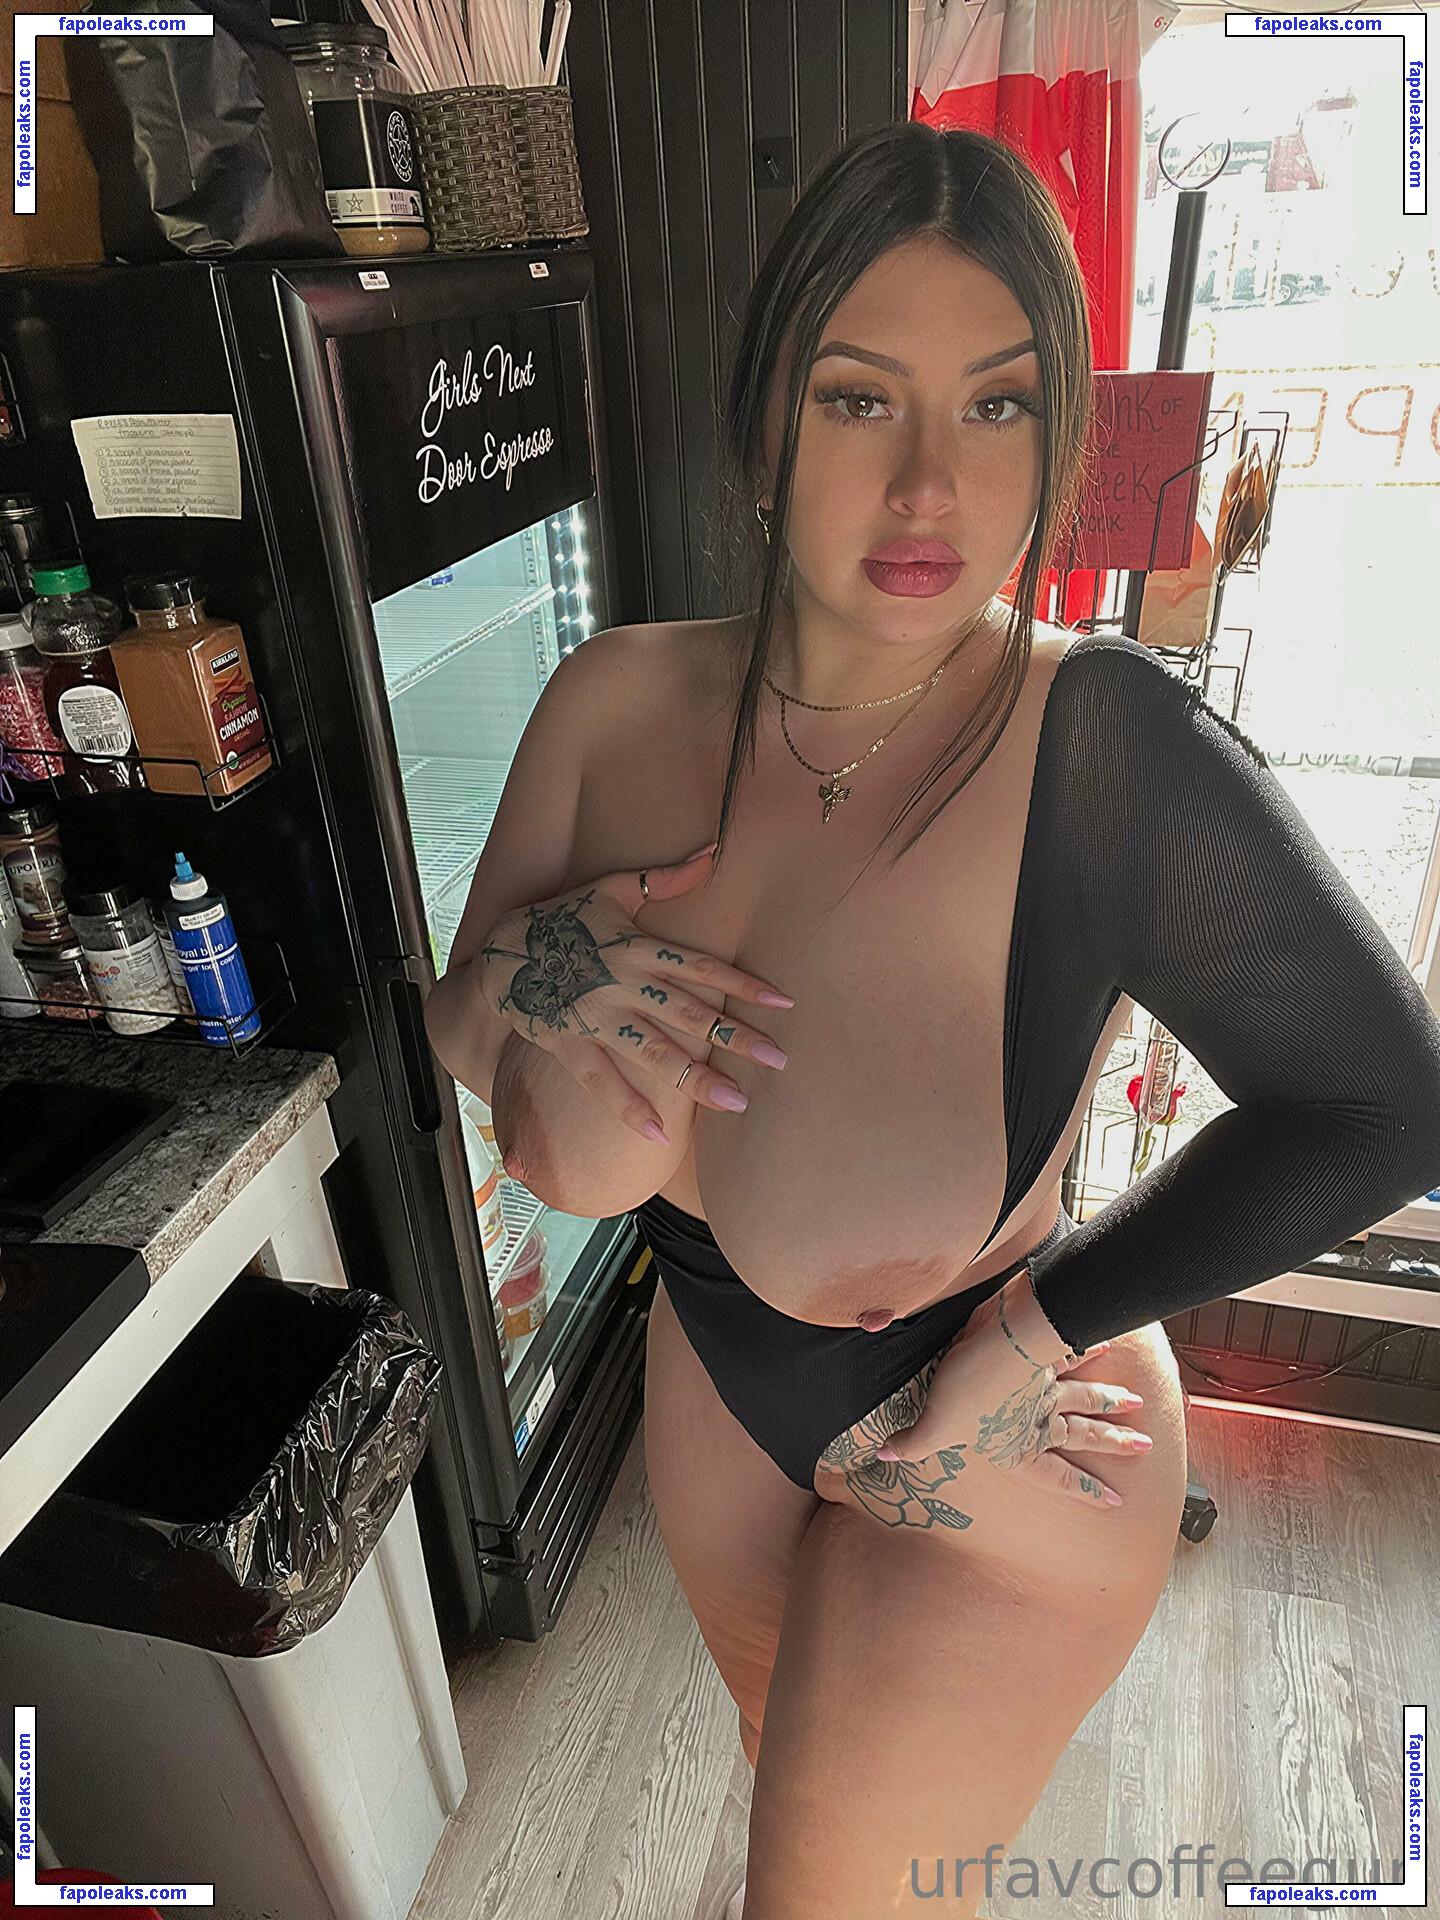 Capbarista / Baristacap / baristacap333 / baristacaprice2.0 / urfavcoffeegurl nude photo #0299 from OnlyFans